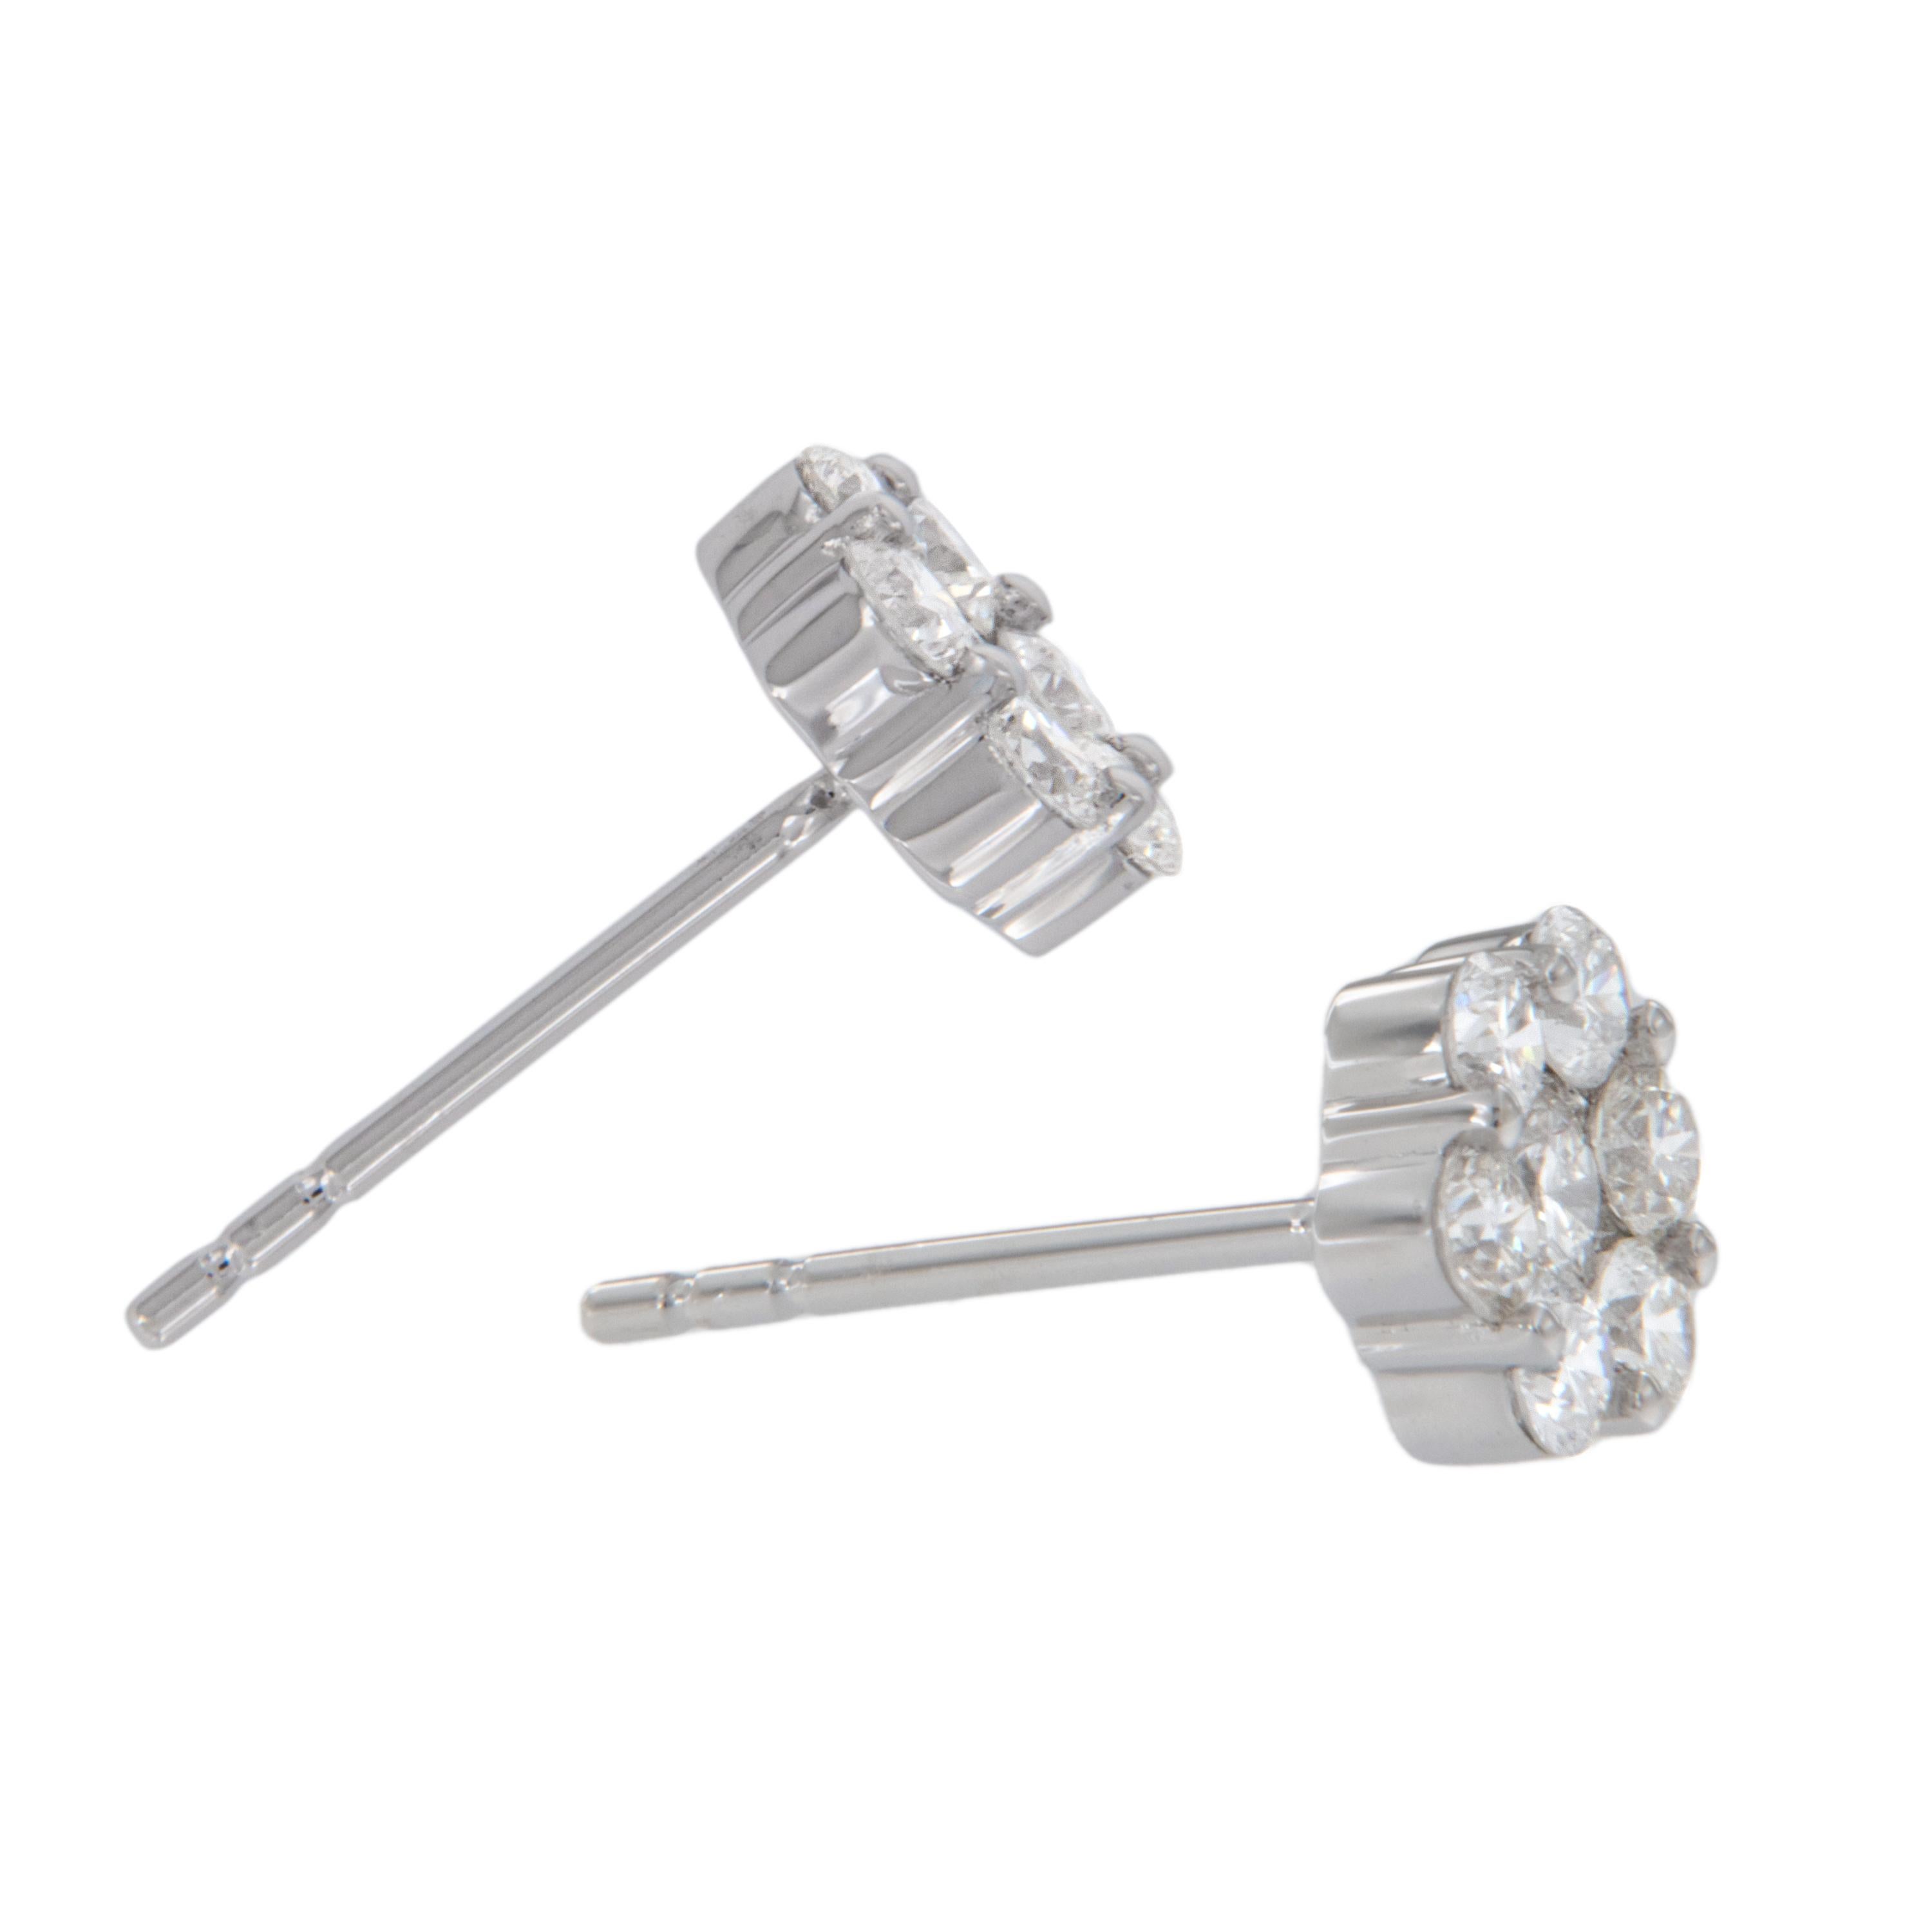 You can't go wrong with these fabulous cluster stud earrings! Made from fine 18 karat white gold & set with 0.75 Cttw of VS clarity & F-G color diamonds having posts & friction backs for security of wear. These classic earrings have a substantial